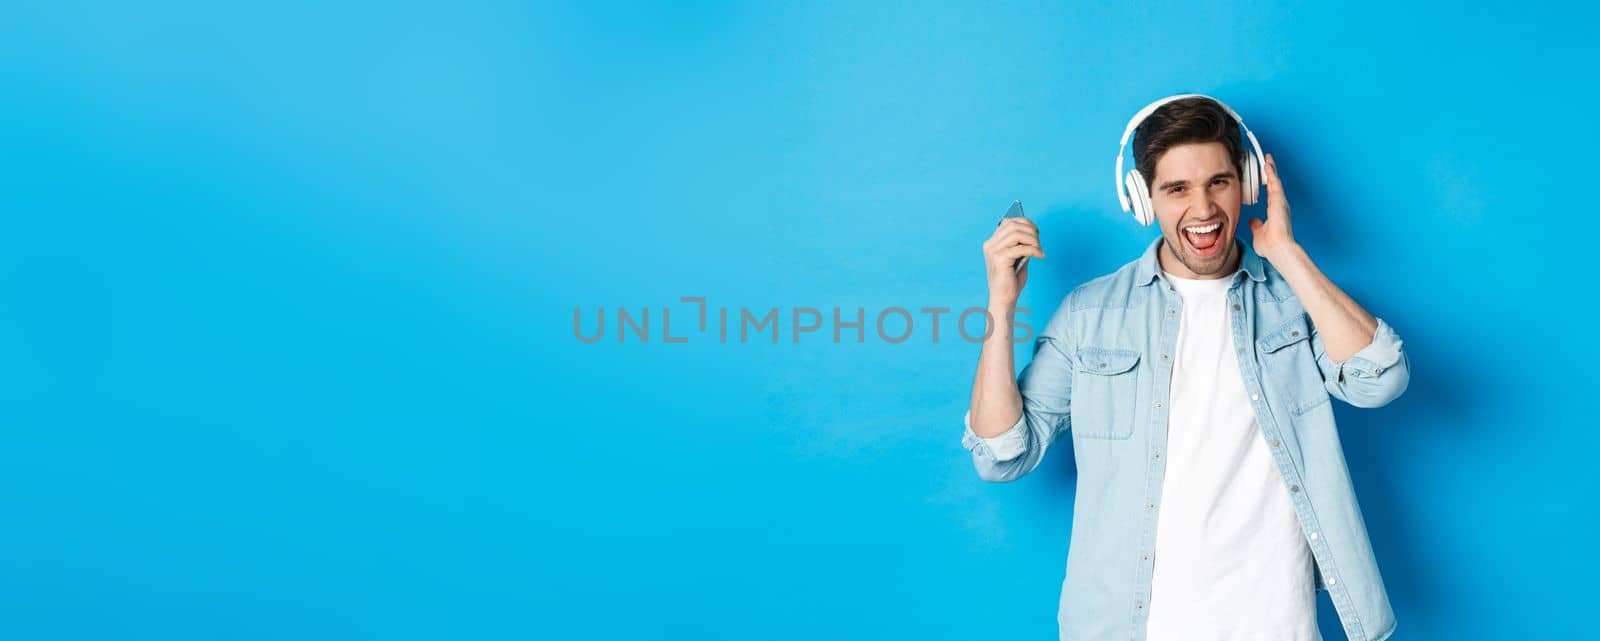 Happy smiling man enjoying listening to music in headphones, holding smartphone in raised hand, standing over blue background.